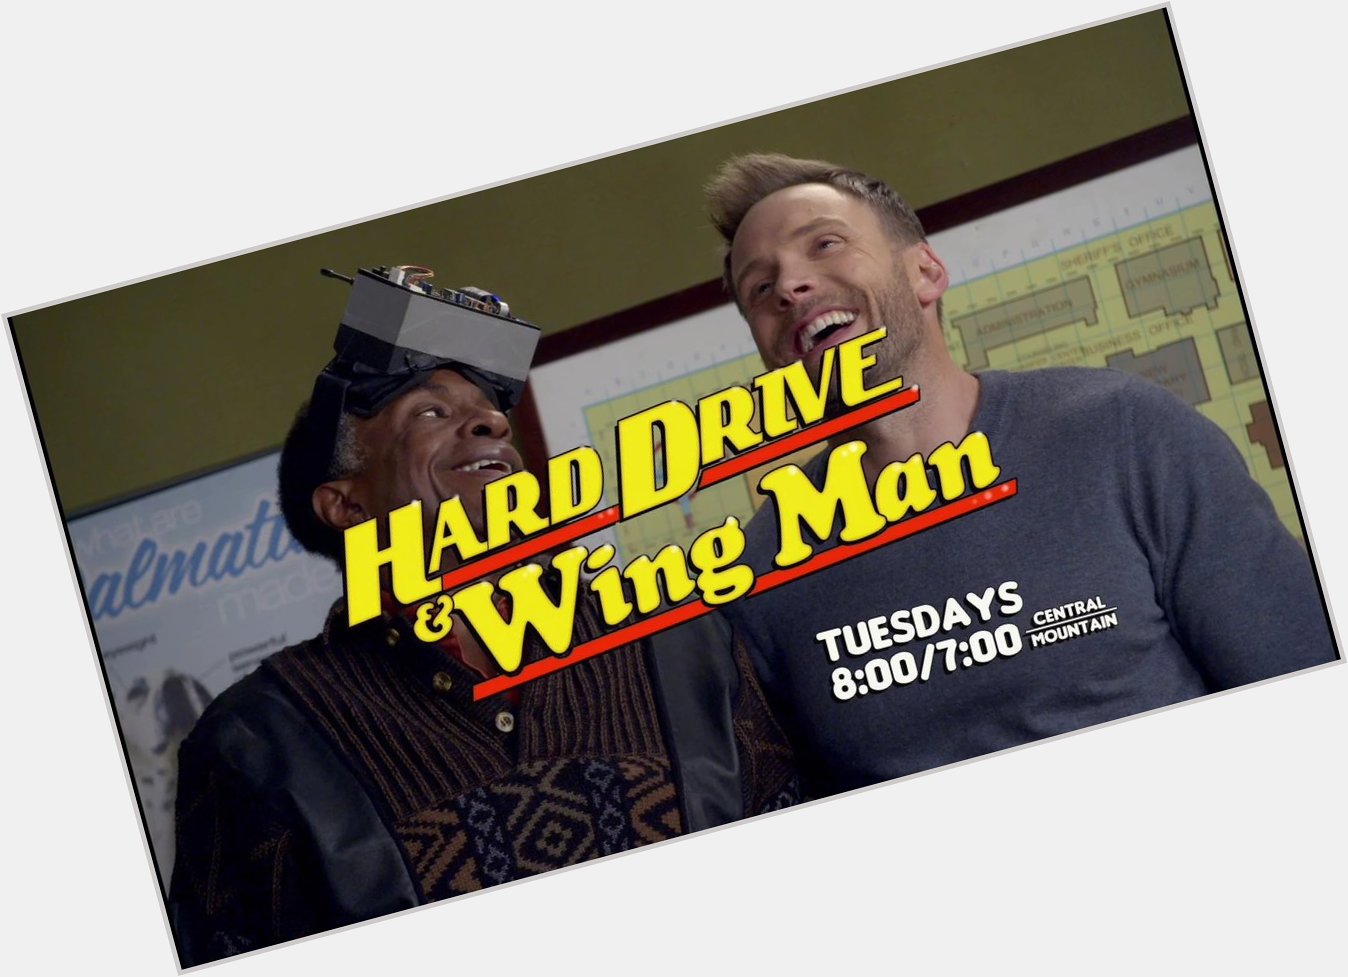 Happy birthday to Keith David aka Hard Drive from the hit show that never was Hard Drive & Wing Man 